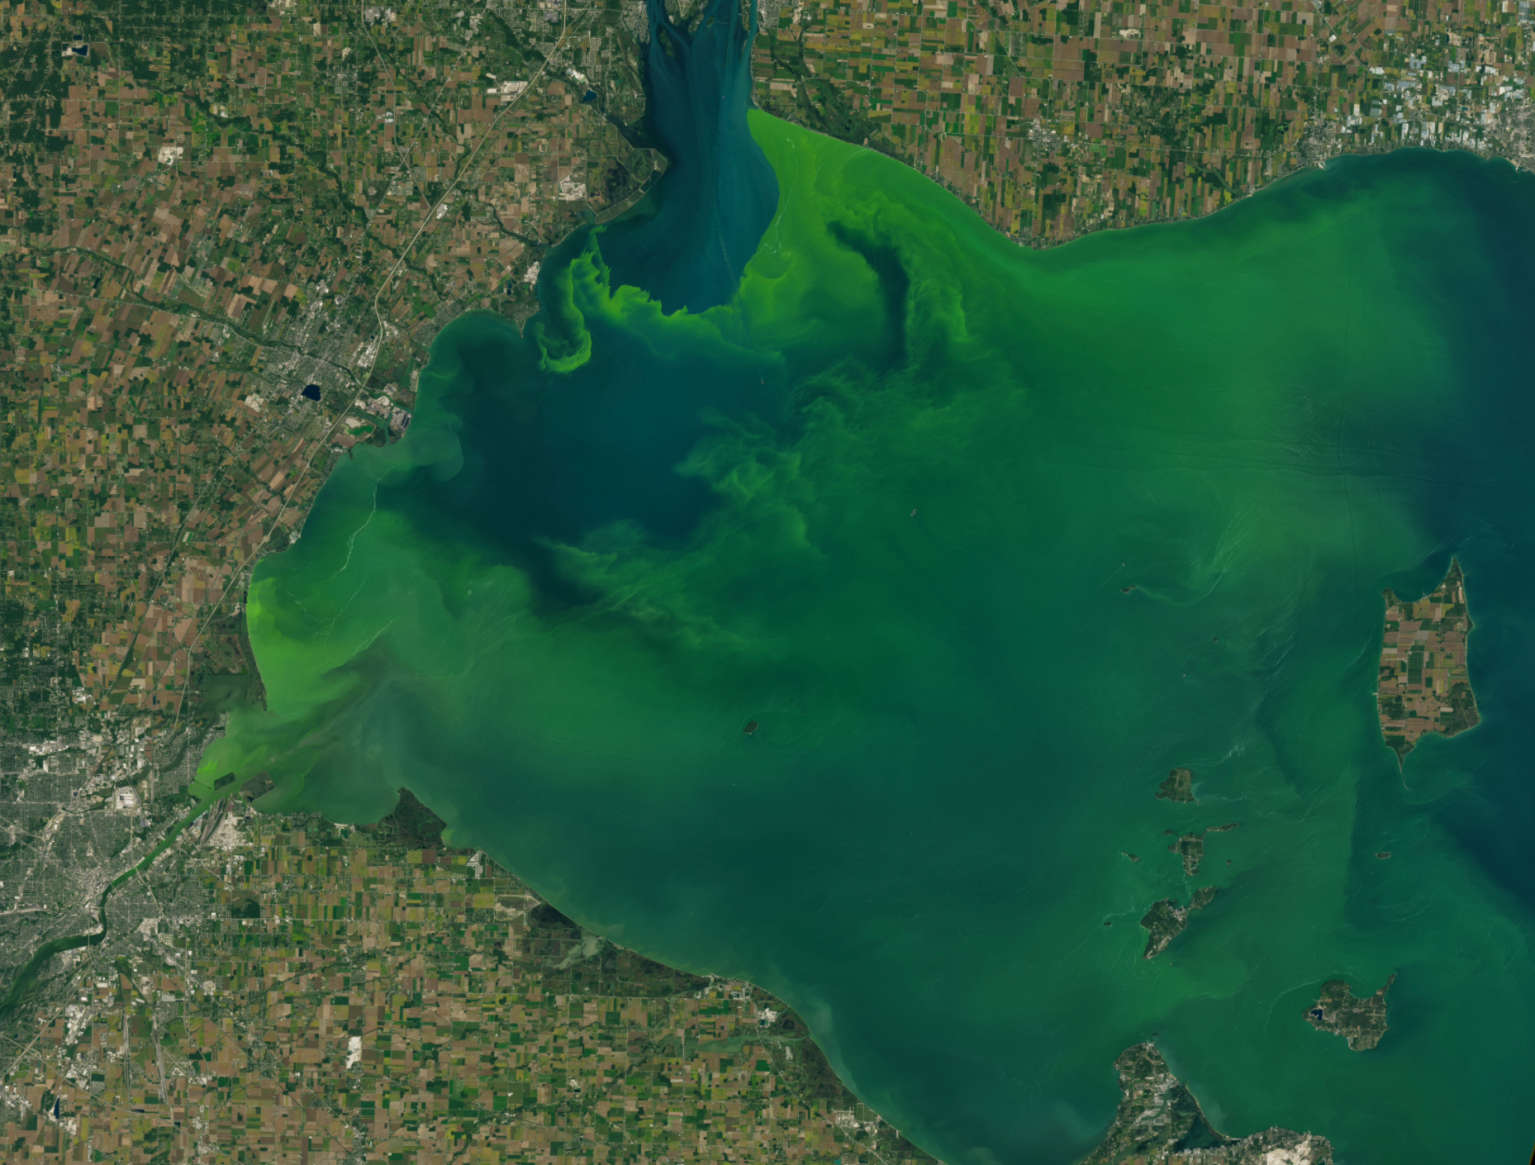 A satellite image of an algal bloom from space. Brown land crisscrossed with tiny rectangular farm fields and gray-green cities surrounds the edges of the image. A large body of water, mostly covered by the bright green swirl of cyanobacteria making up the algal bloom, fills the center. Some blue water is visible near the top of the image, and a small island, also covered with fields, is near the right side.